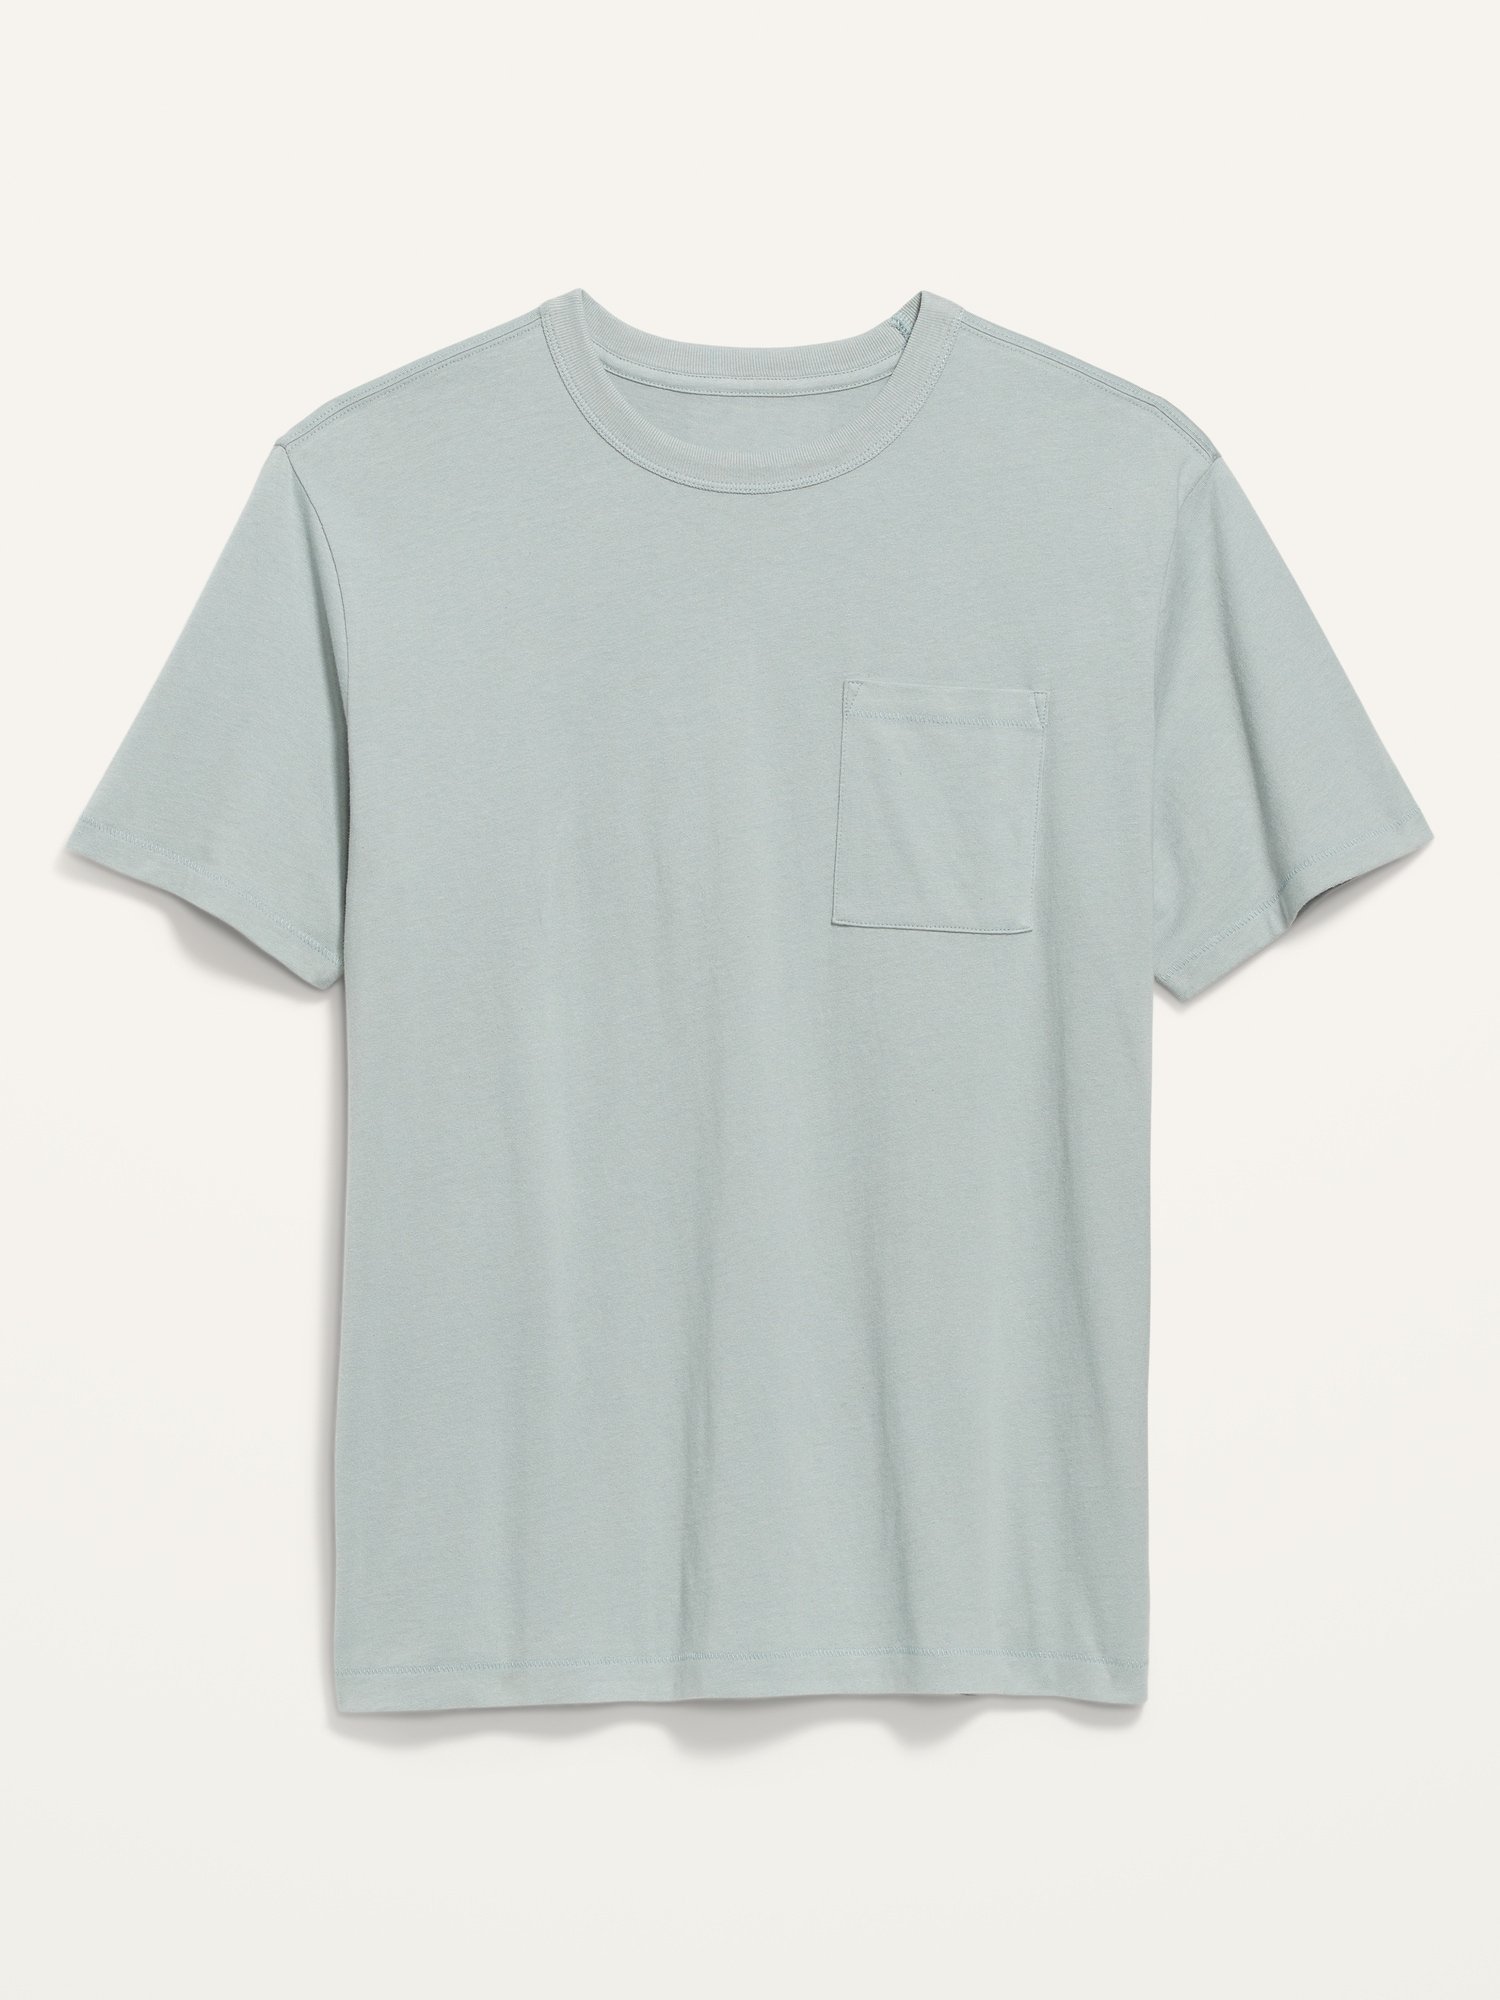 ONLINE EXCLUSIVE_Loose-Fit Chest-Pocket Rotation T-Shirt for Men_SilverSage_1250.jpeg